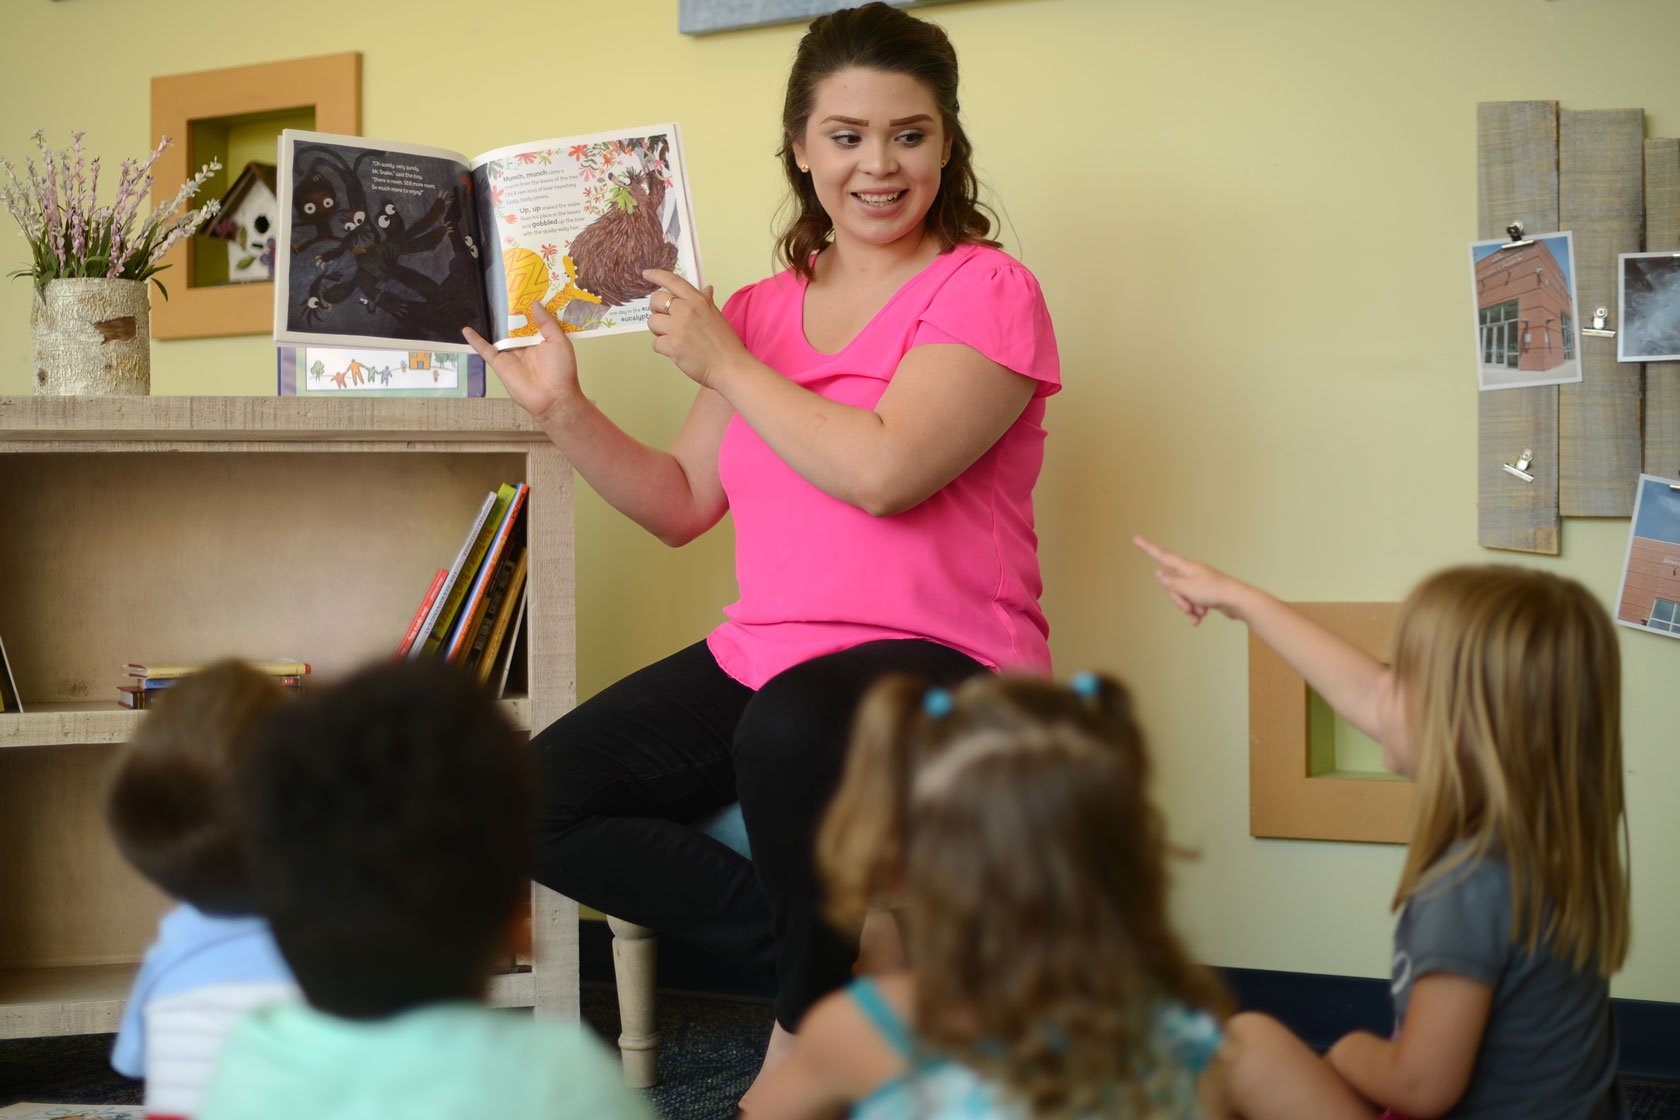 An educator reads books for children at an early learning center in Aurora, Colorado.